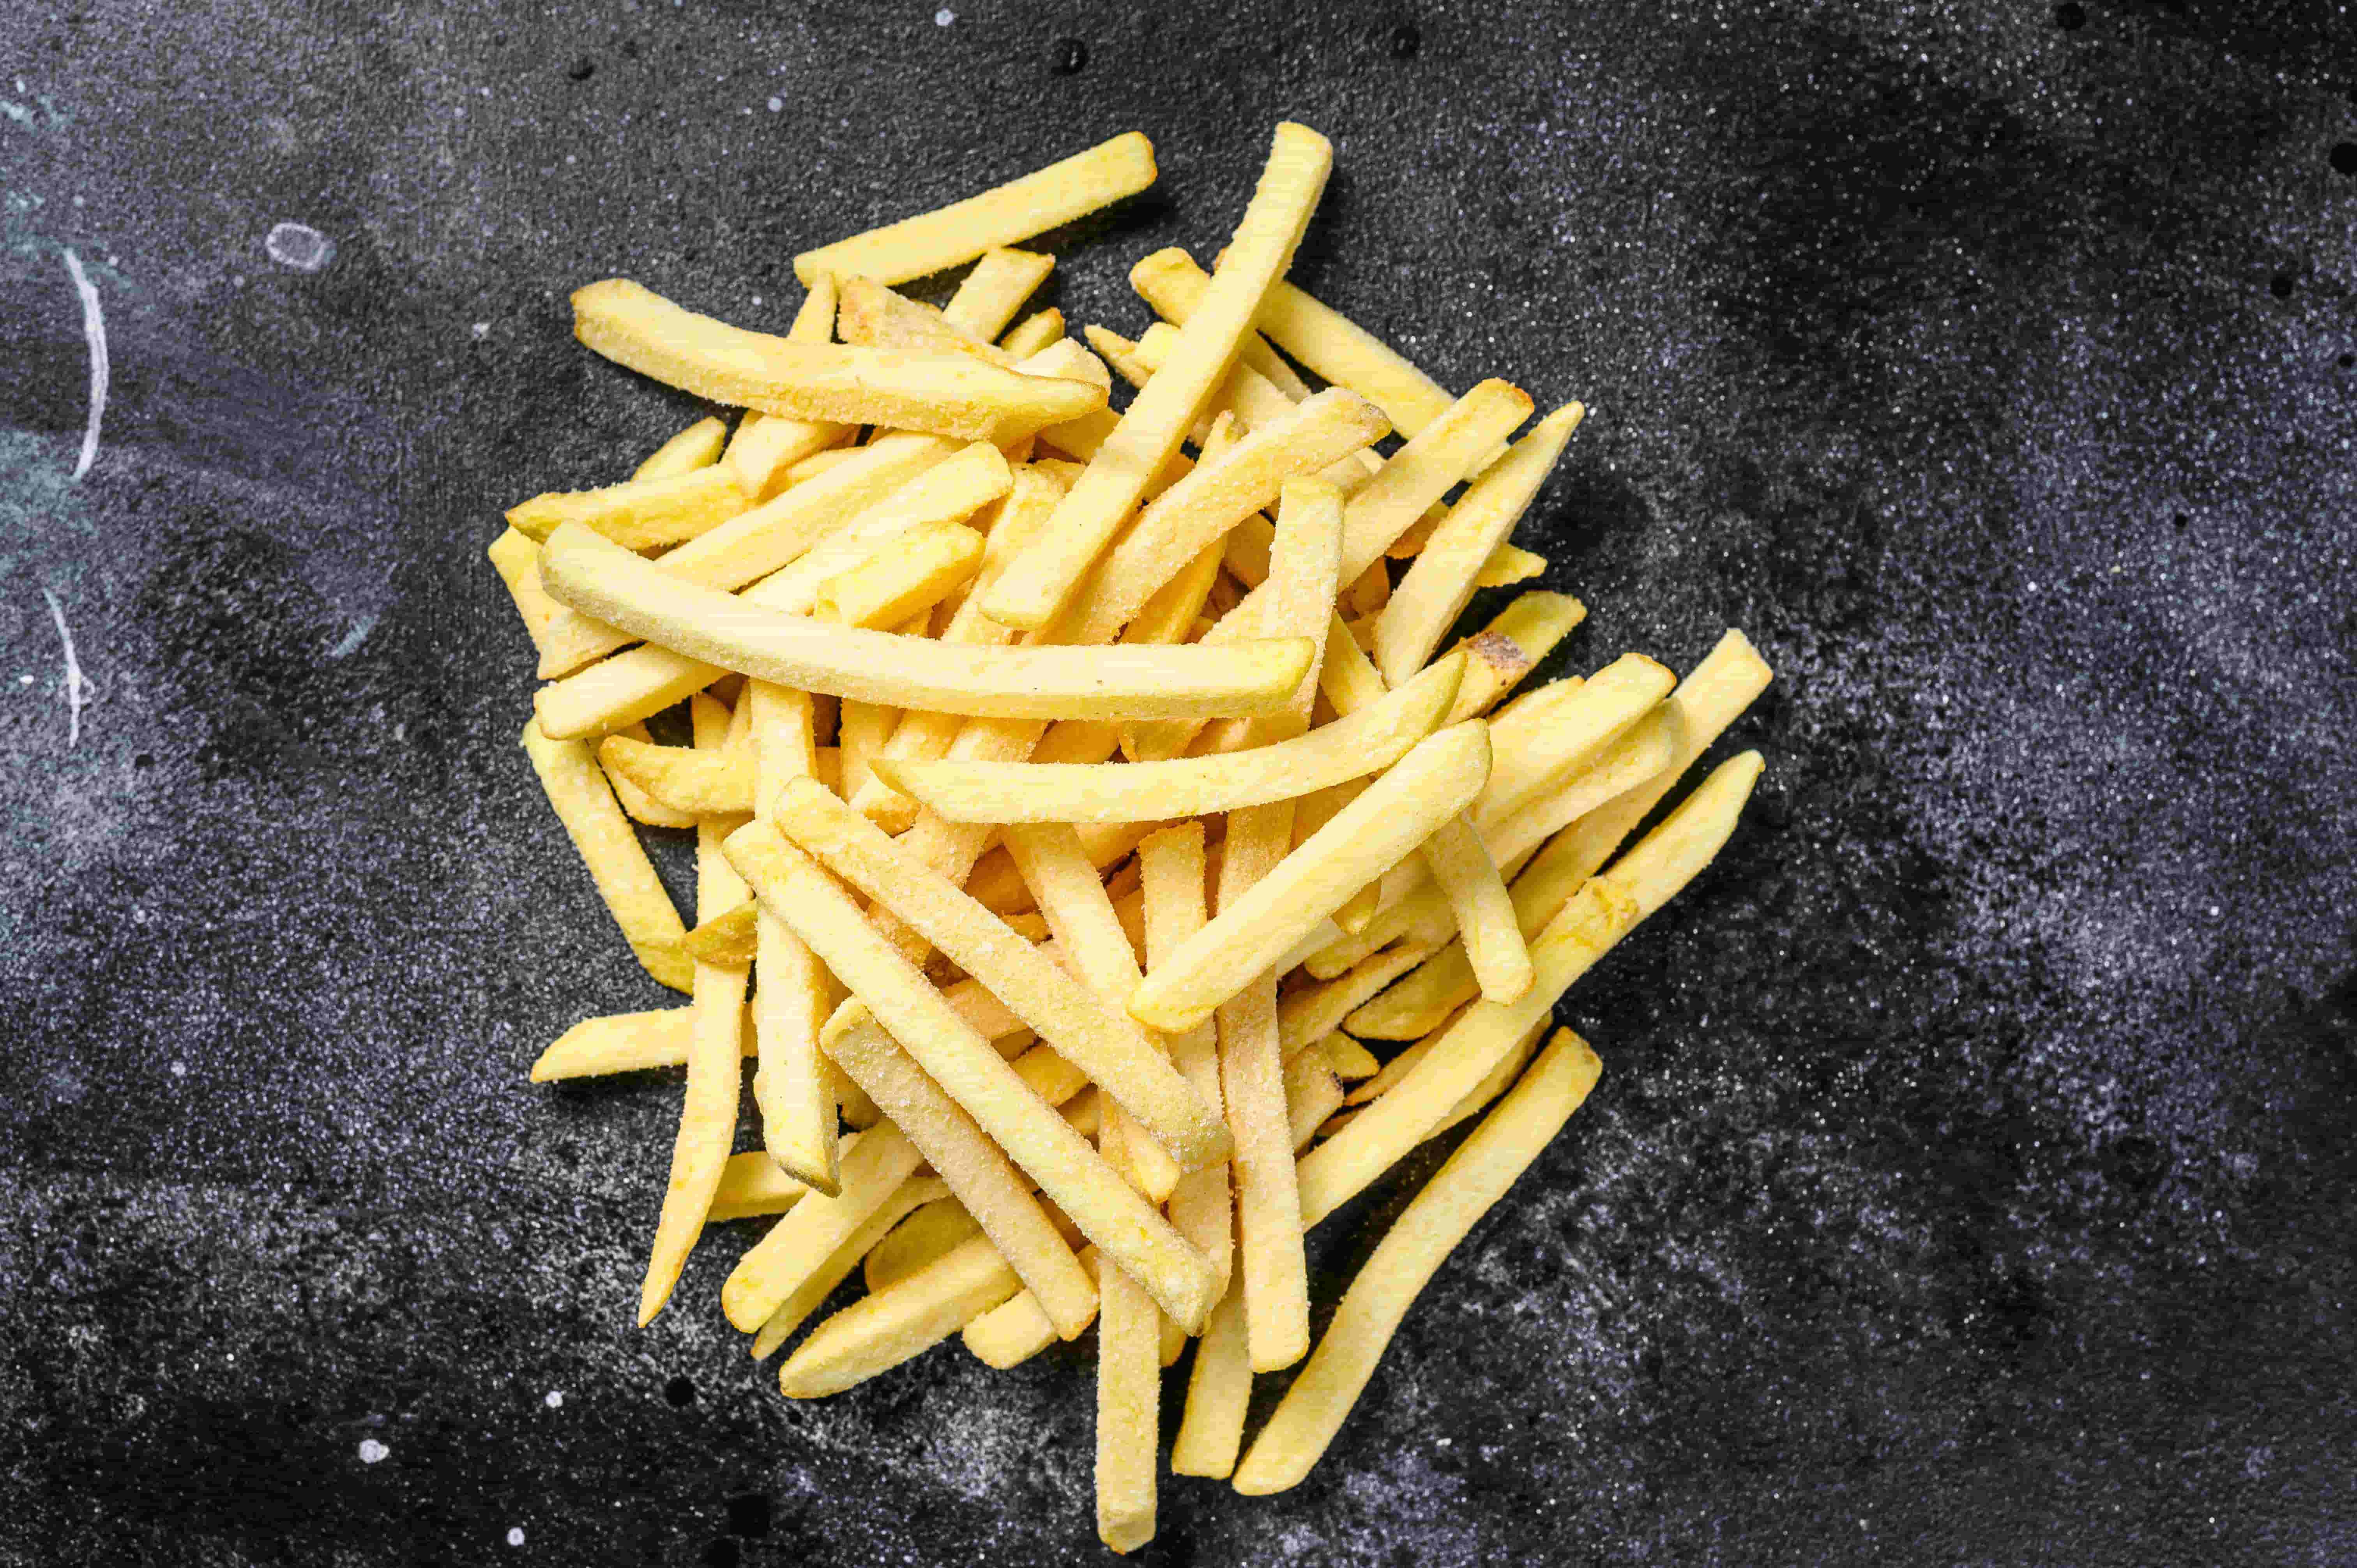 Is The French Fries Business Profitable?